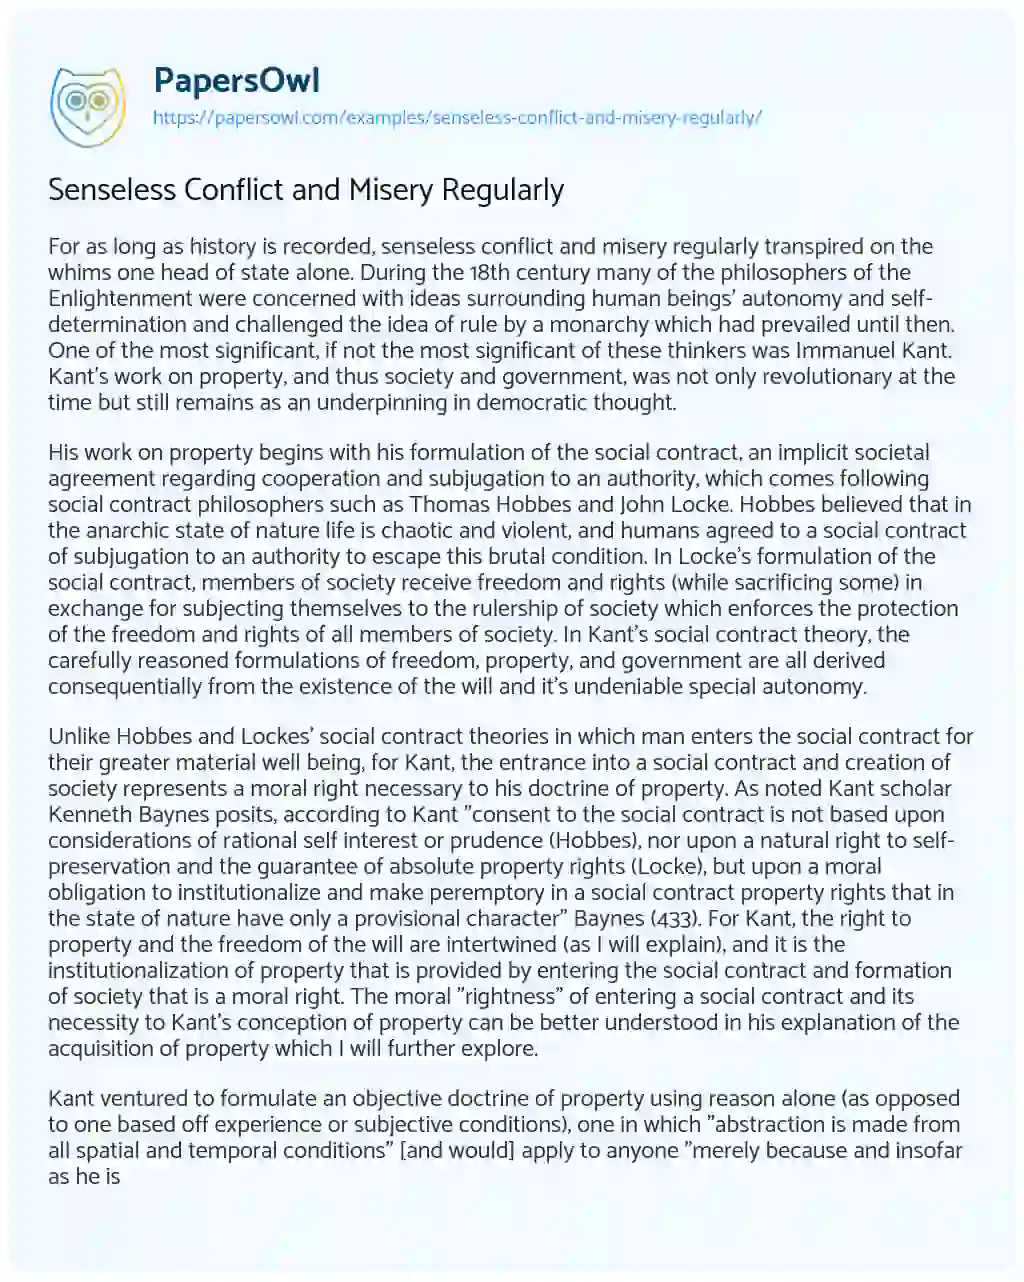 Essay on Senseless Conflict and Misery Regularly